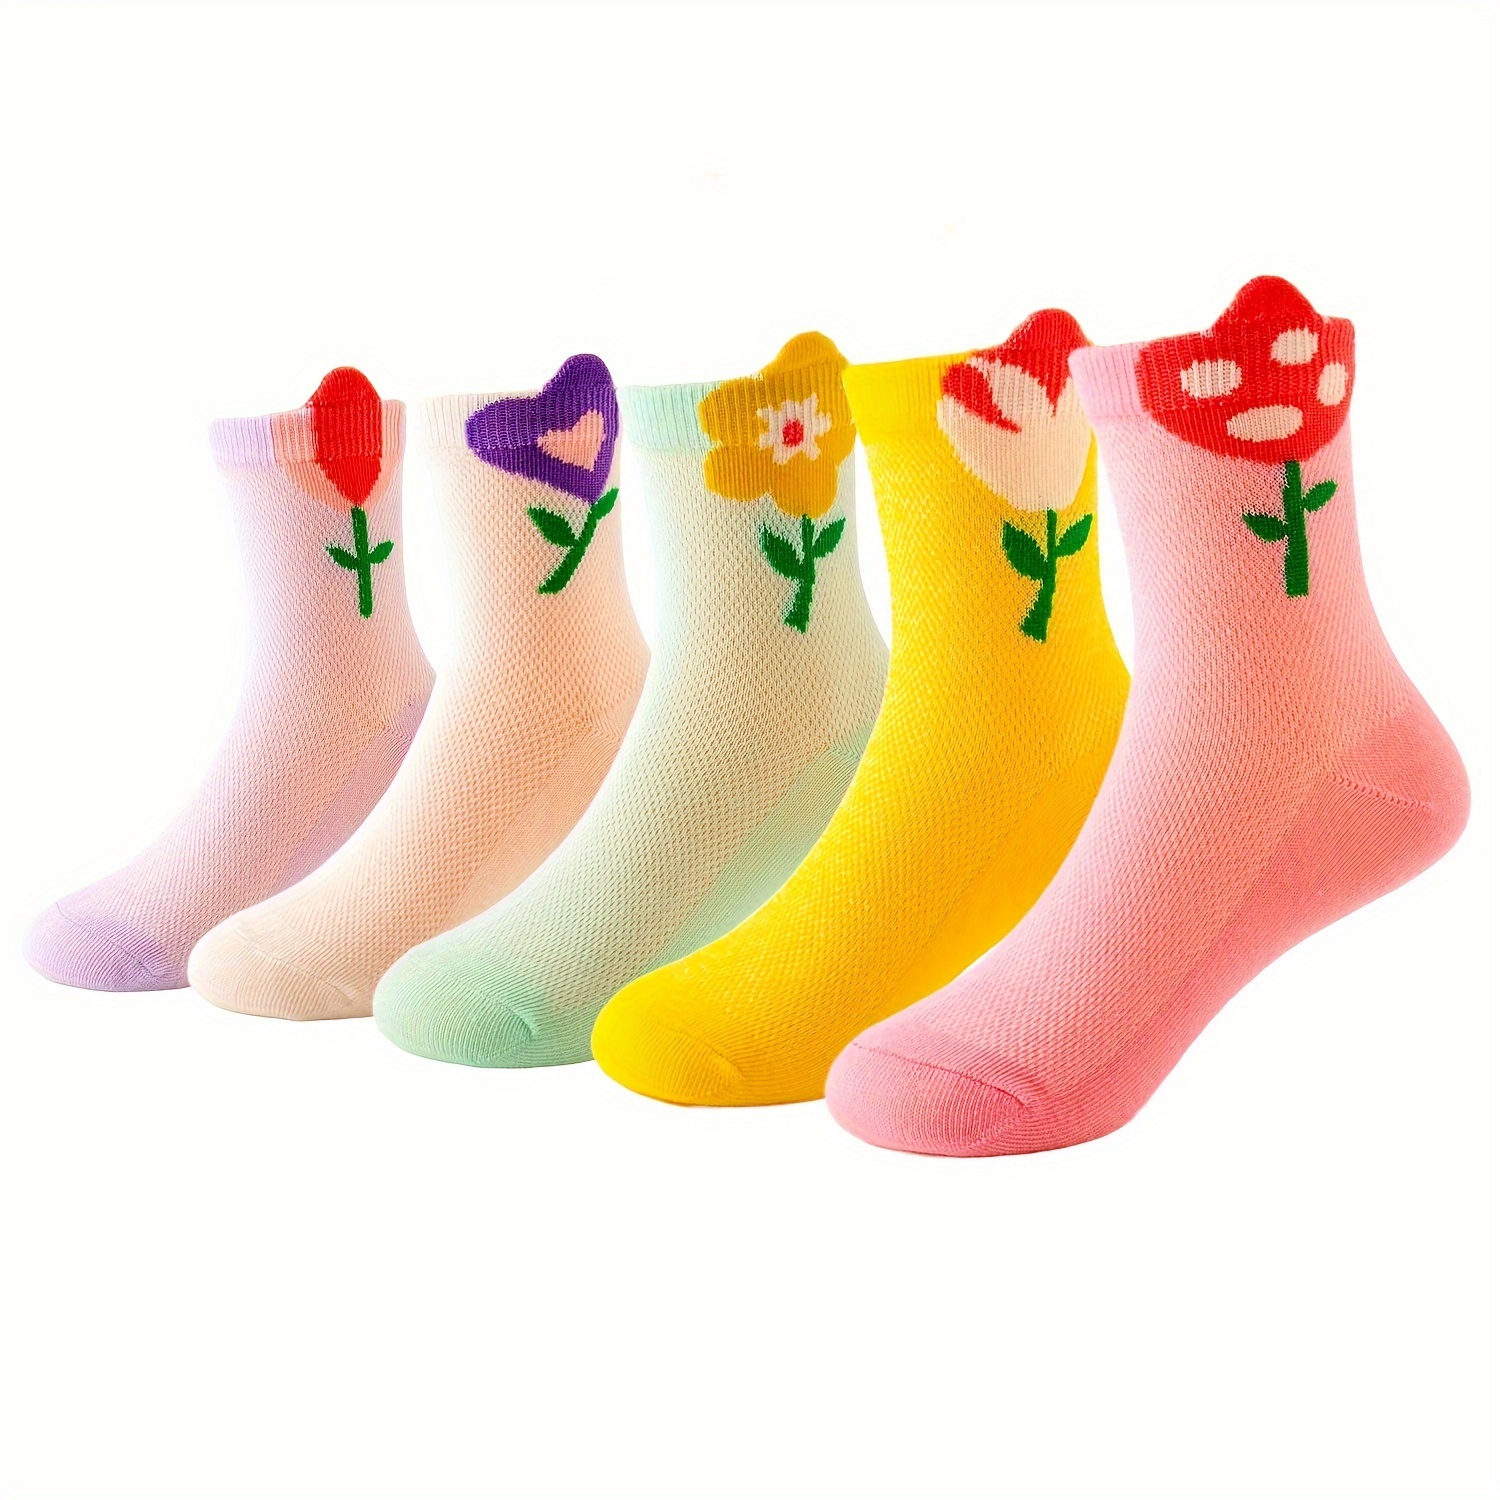 

5 Pairs Of Toddler's Cute Cartoon Floral Crew Socks, Soft Comfy Cotton Blend Children's Socks For Boys Girls All Seasons Wearing